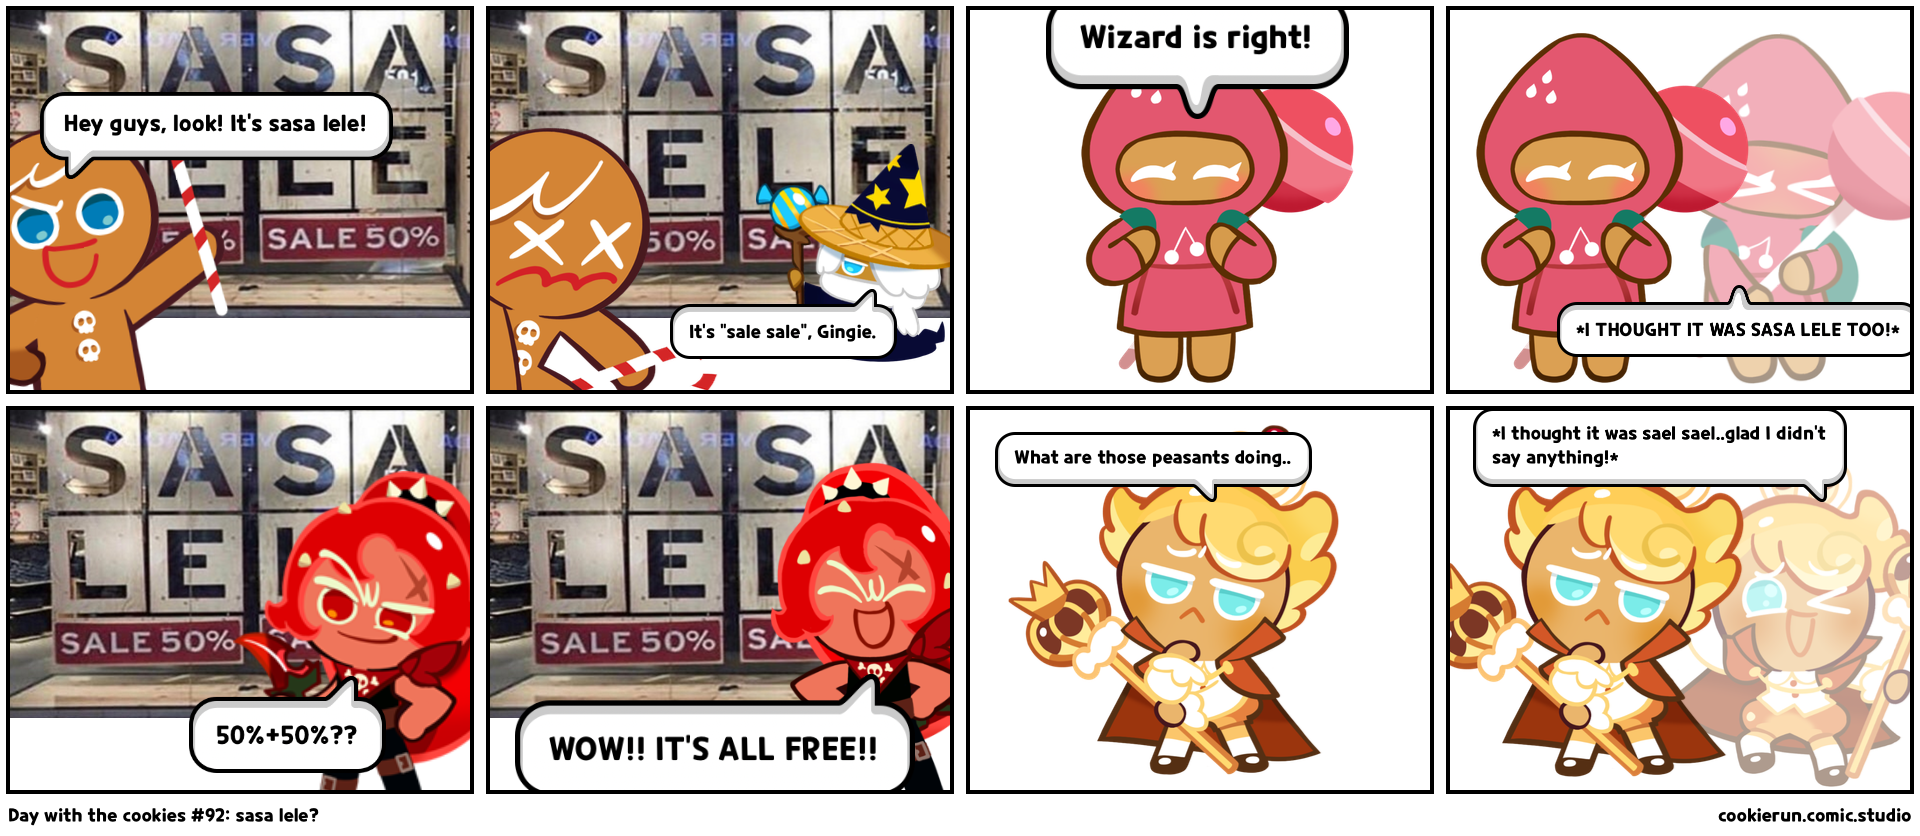 Day with the cookies #92: sasa lele?